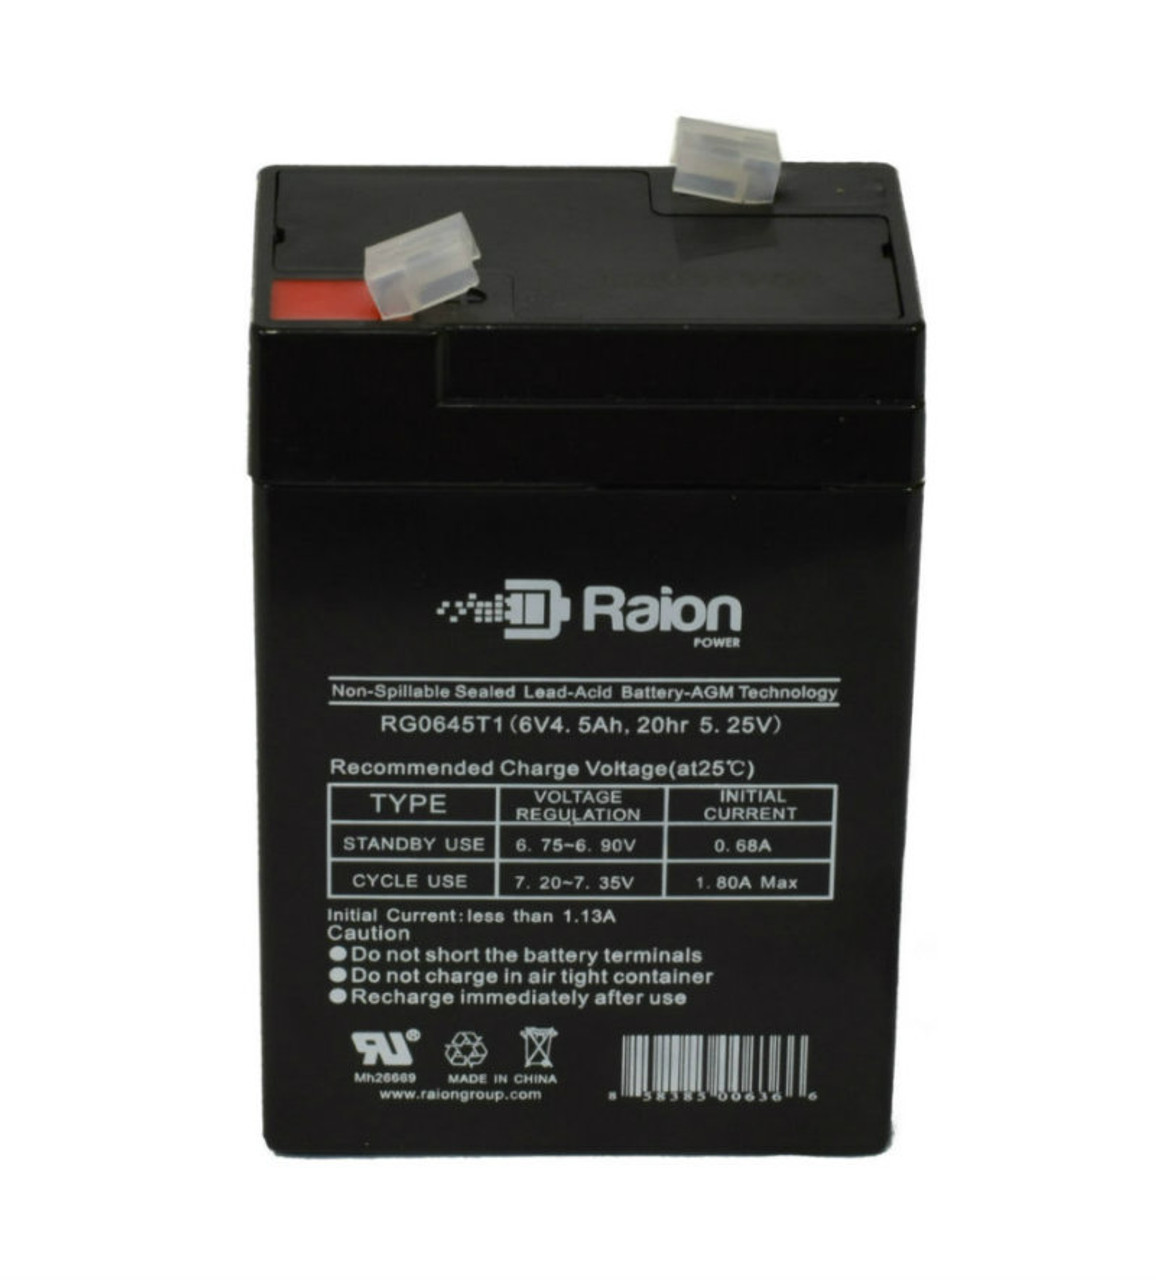 Raion Power RG0645T1 Replacement Battery Cartridge for EaglePicher CF-6V4.5